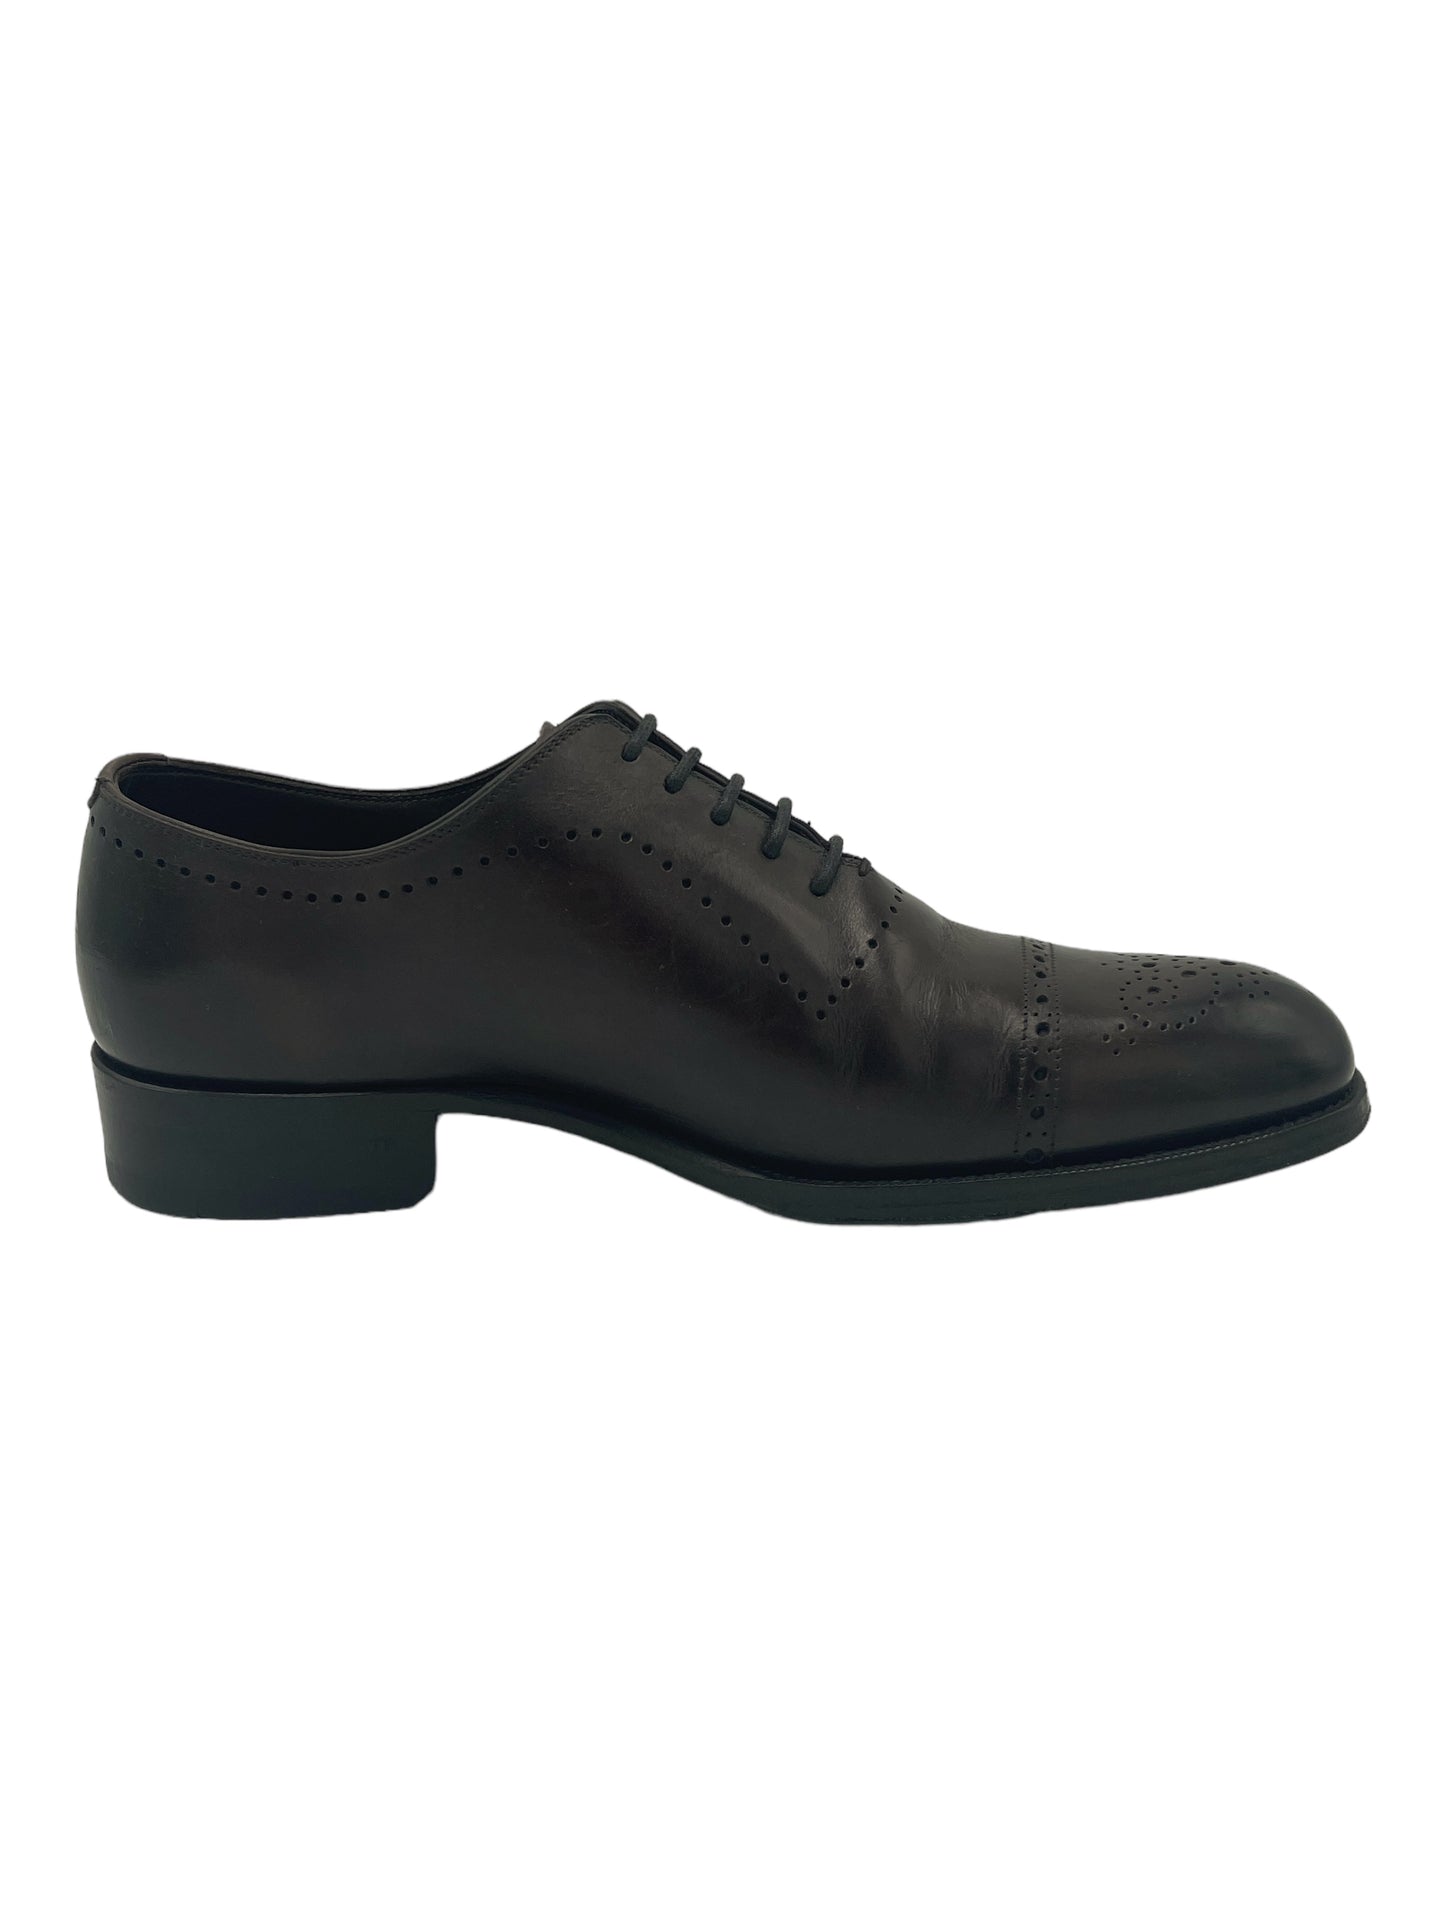 Tom Ford Dark Brown Burnished Leather Edgar Brogue Lace Up